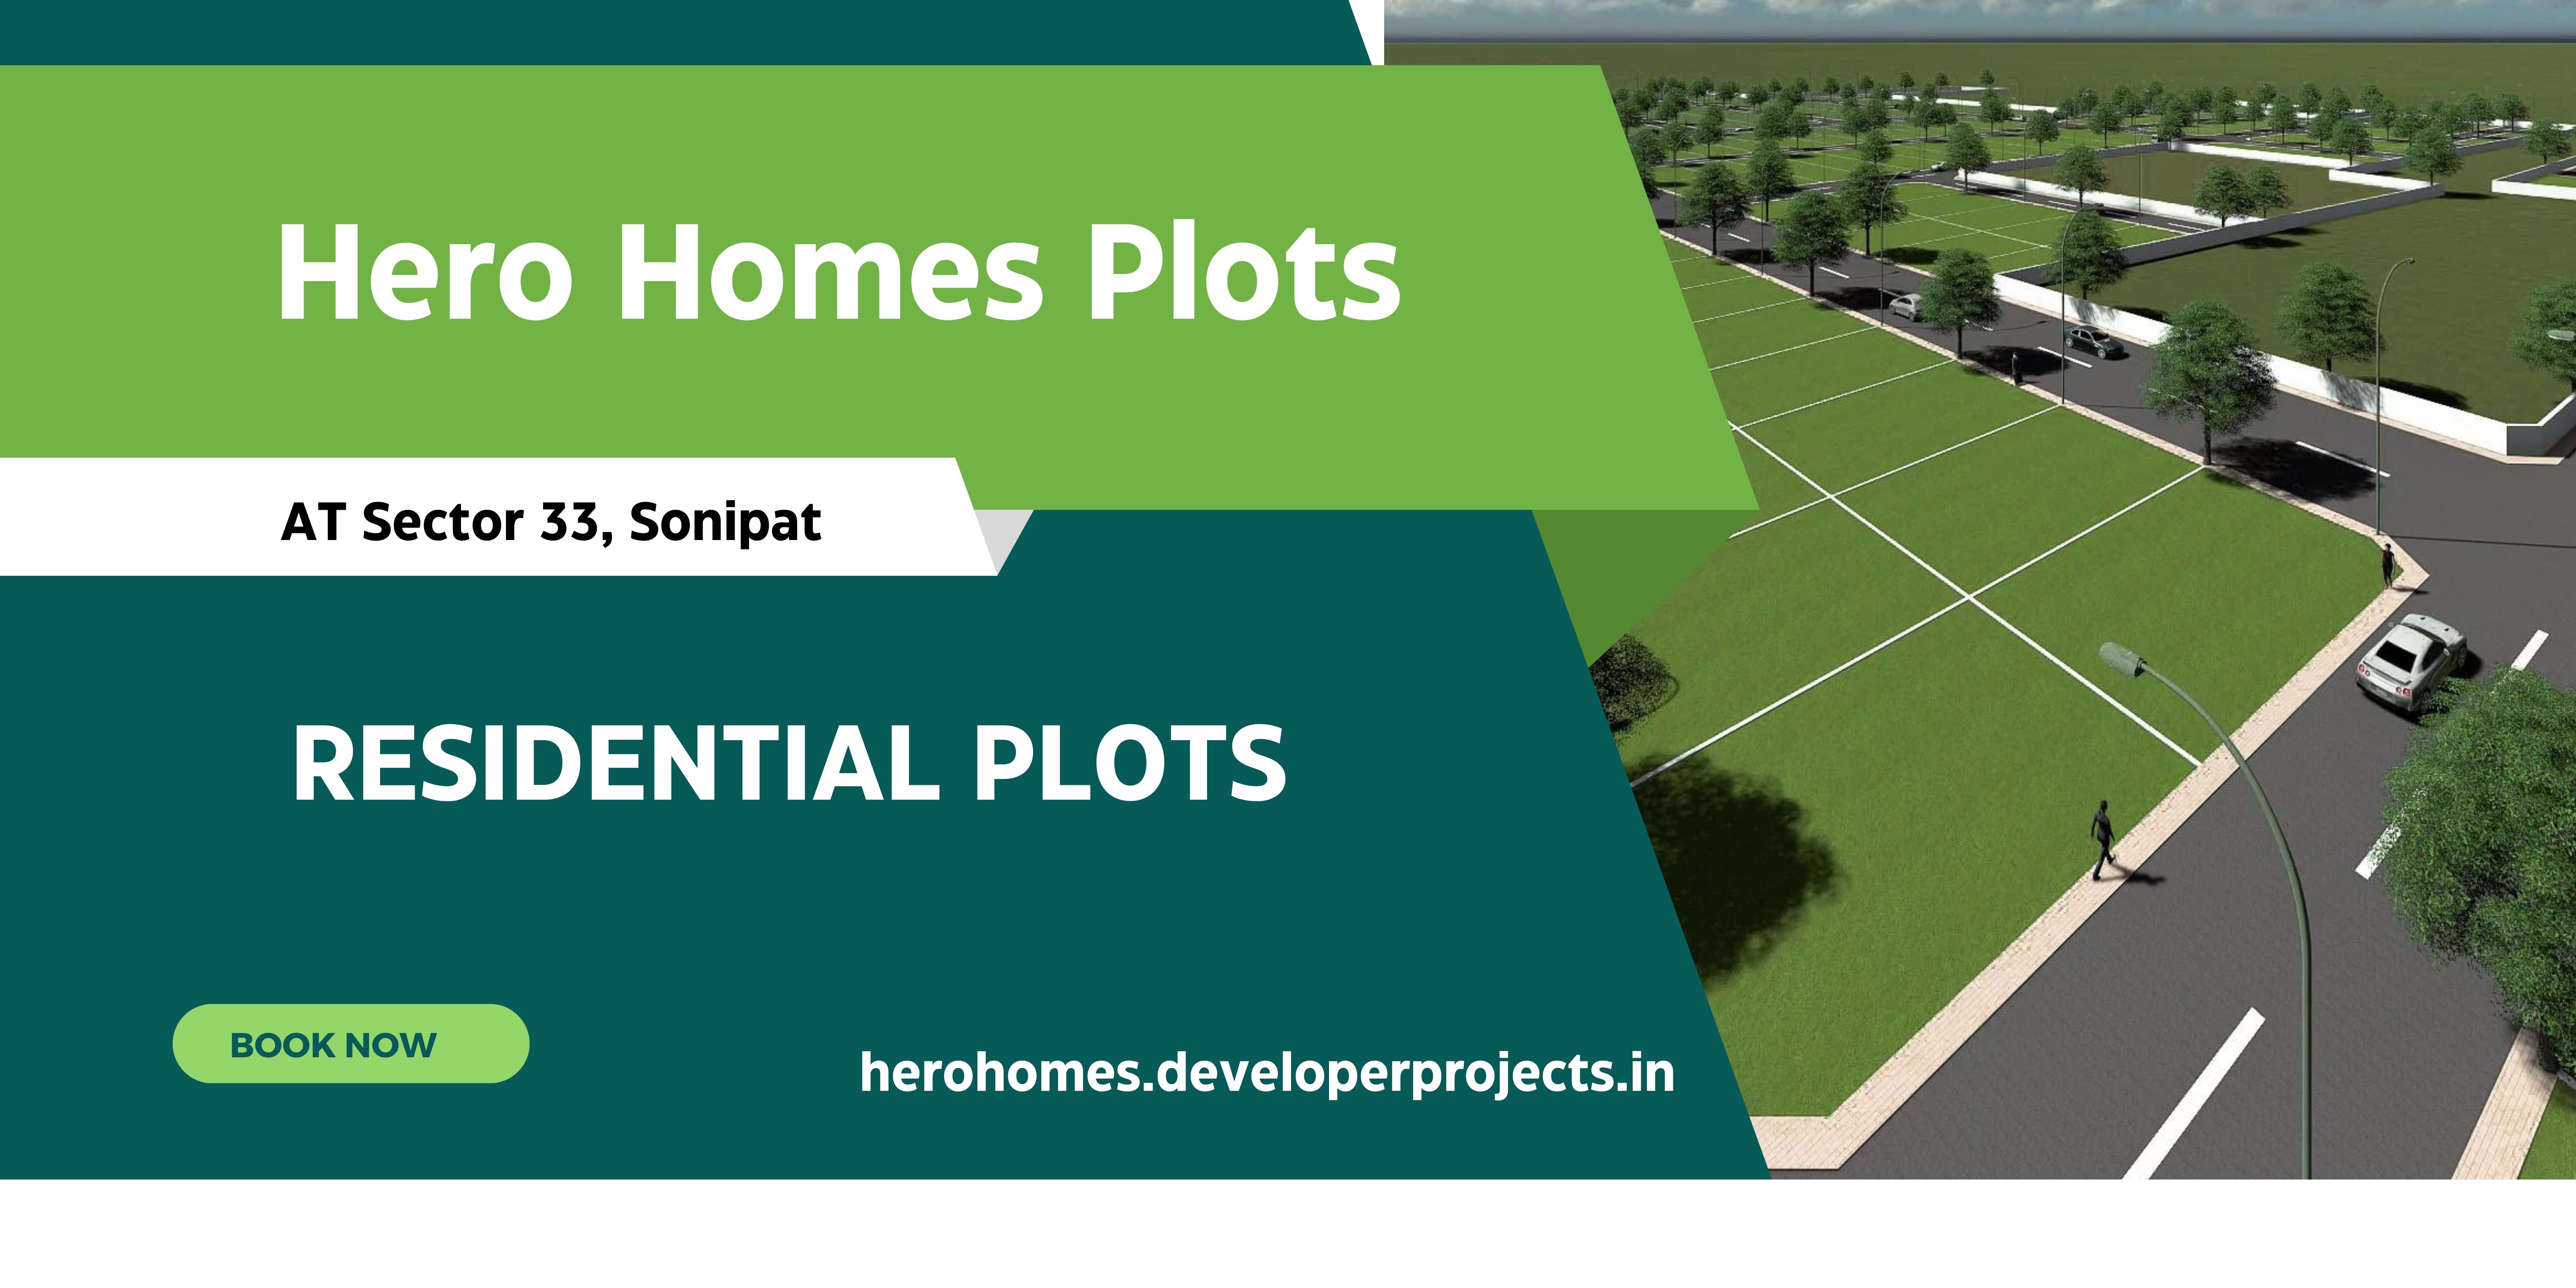 Hero Homes Plots Sector 33 Sonipat - Discover The Lifestyle Difference